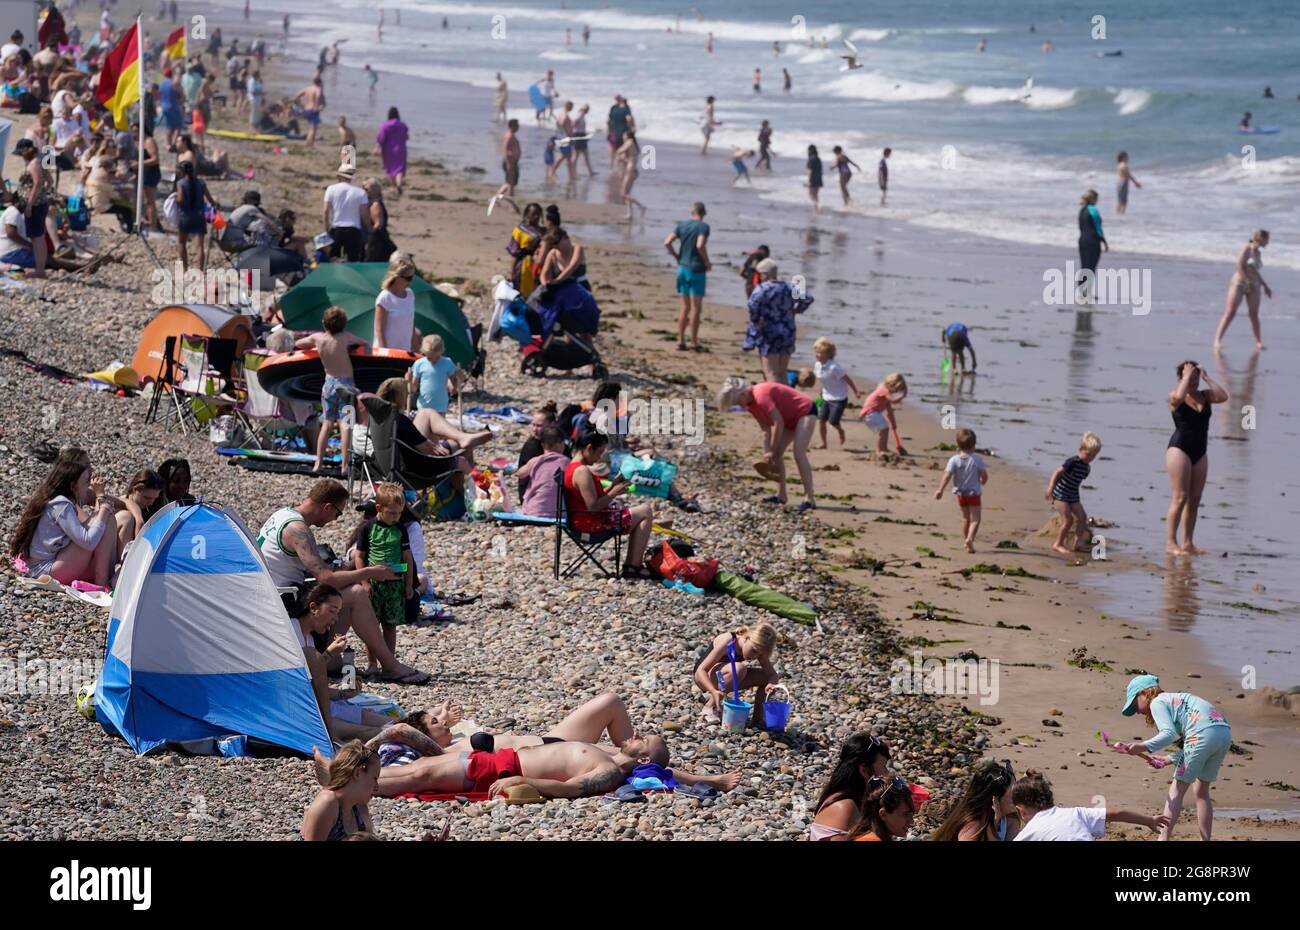 People on the beach at Saltburn-by-the-Sea in North Yorkshire. A heatwave which has baked the UK over the last few days is expected to end with thunderstorms across much of England and Wales this weekend, forecasters have warned. Picture date: Thursday July 22, 2021. Stock Photo